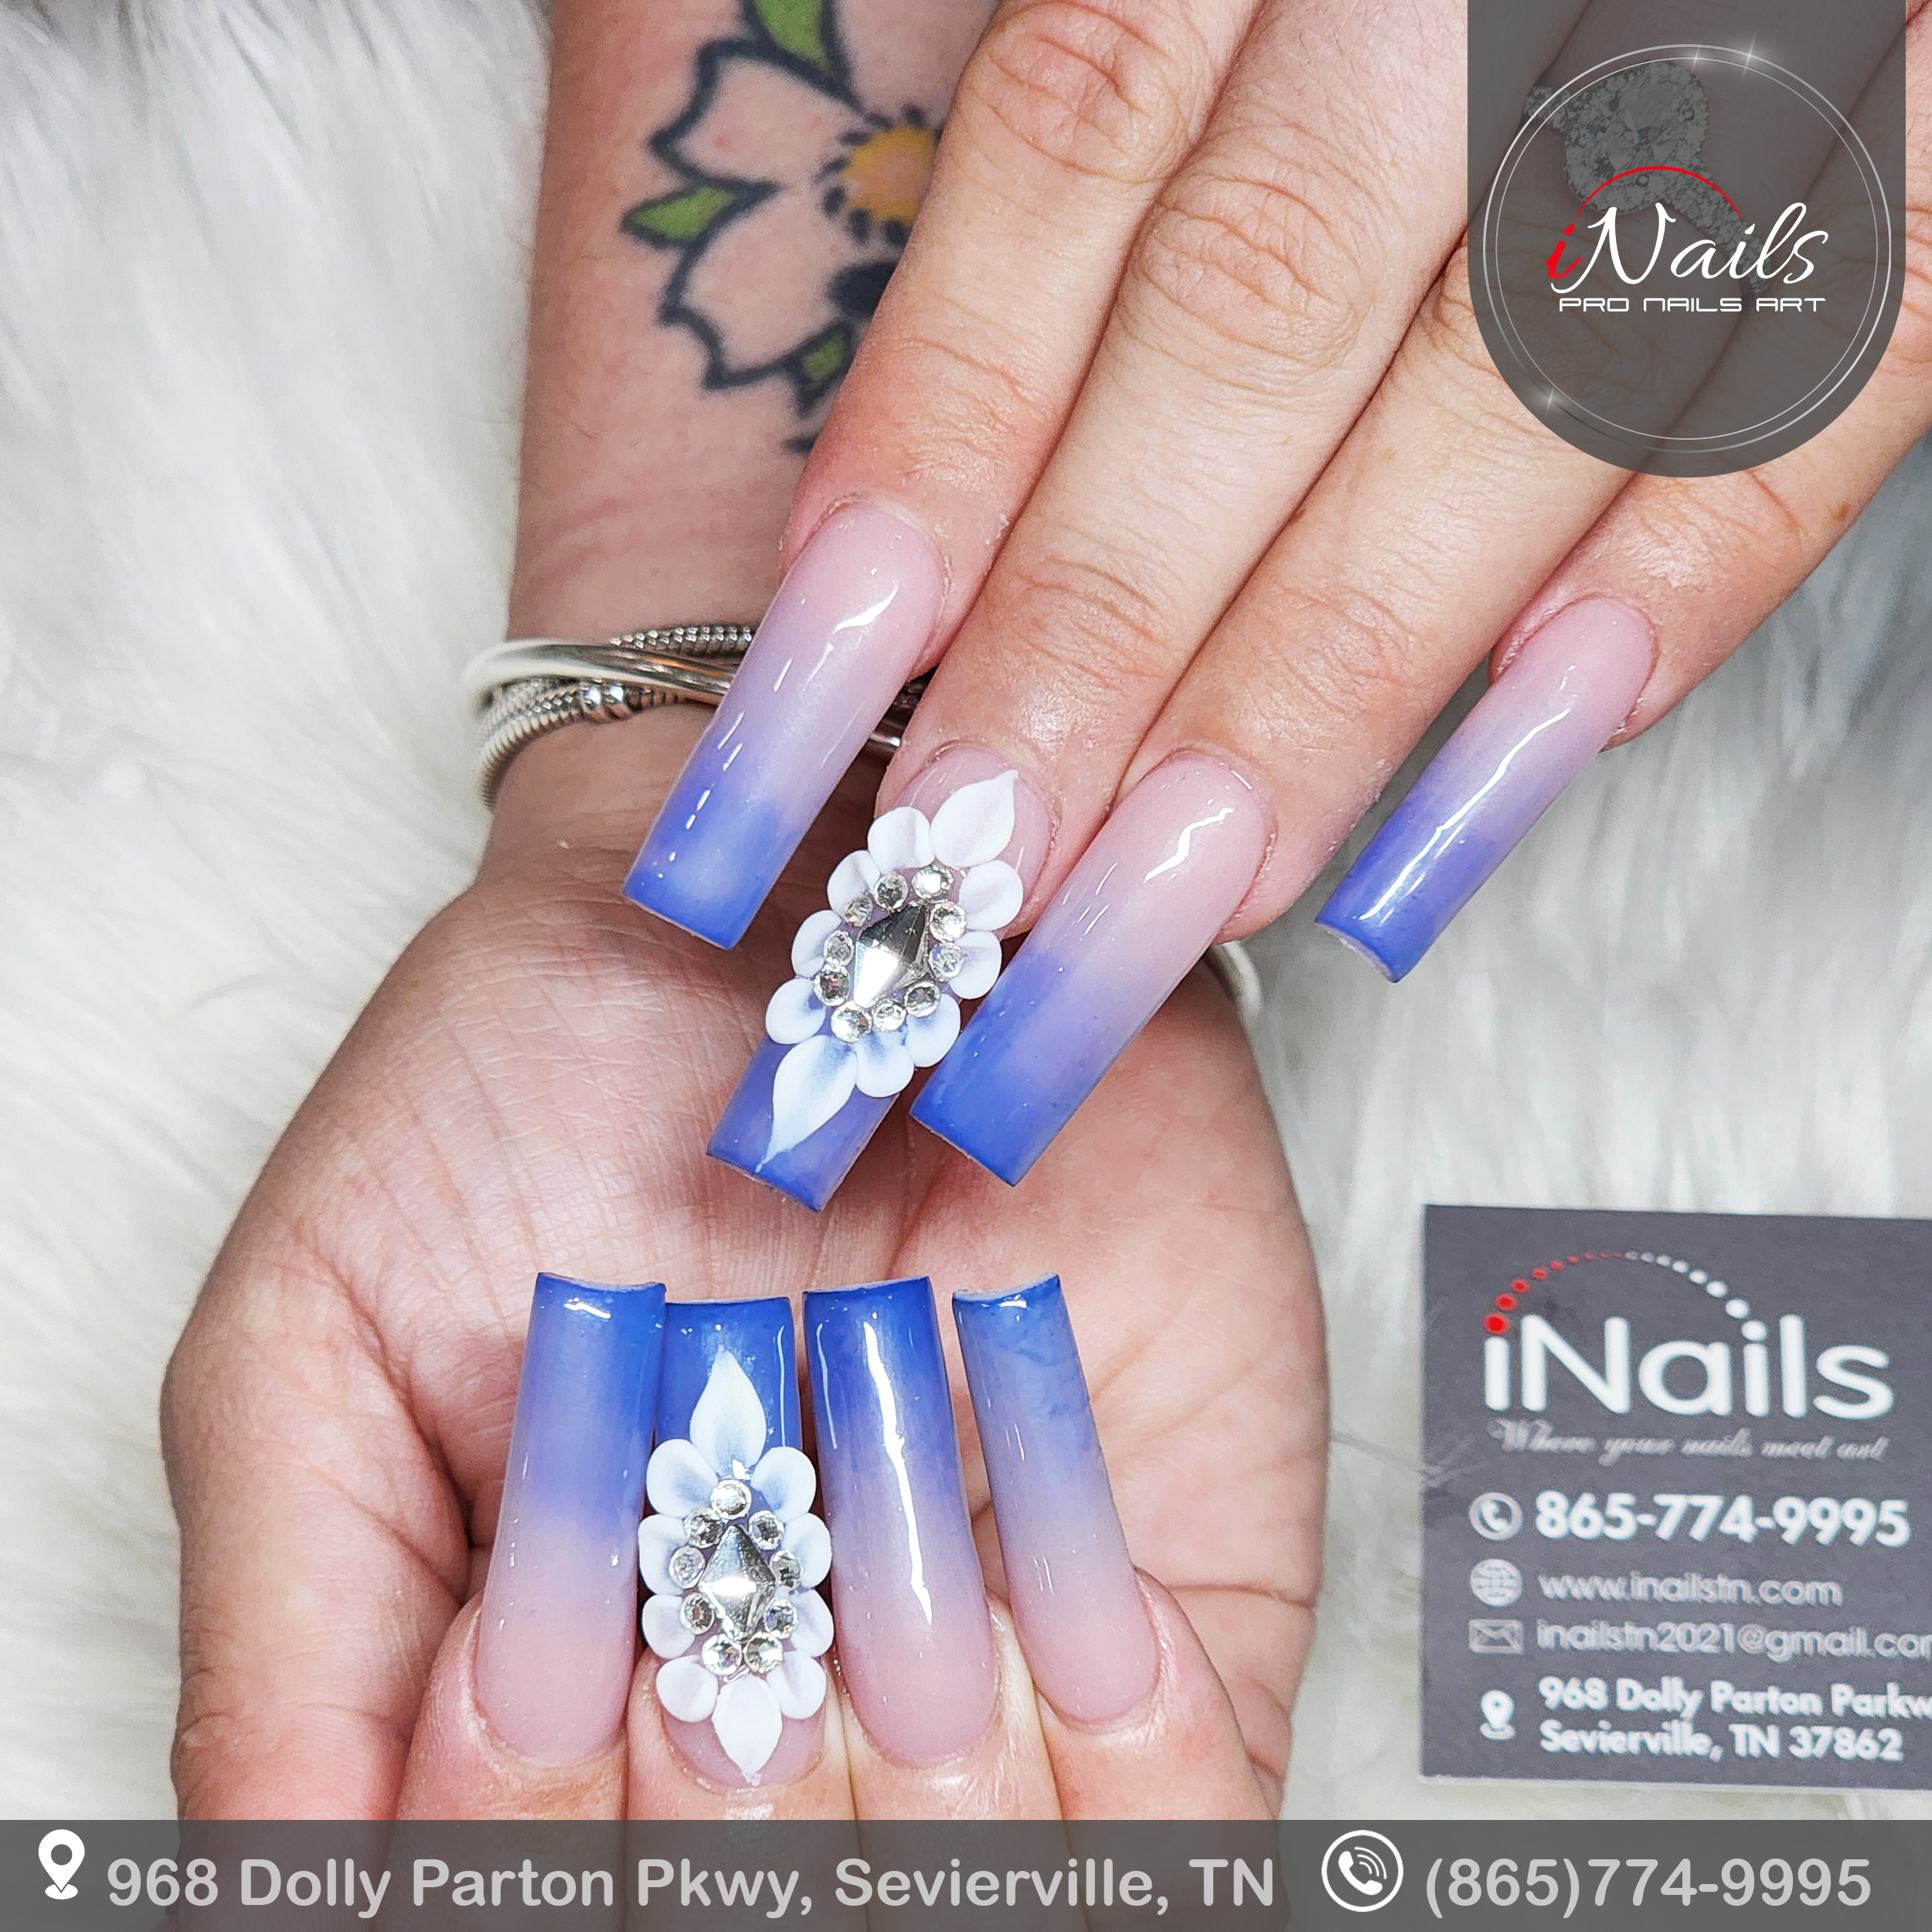 Spring nails inails Sevierville jhsdlfs